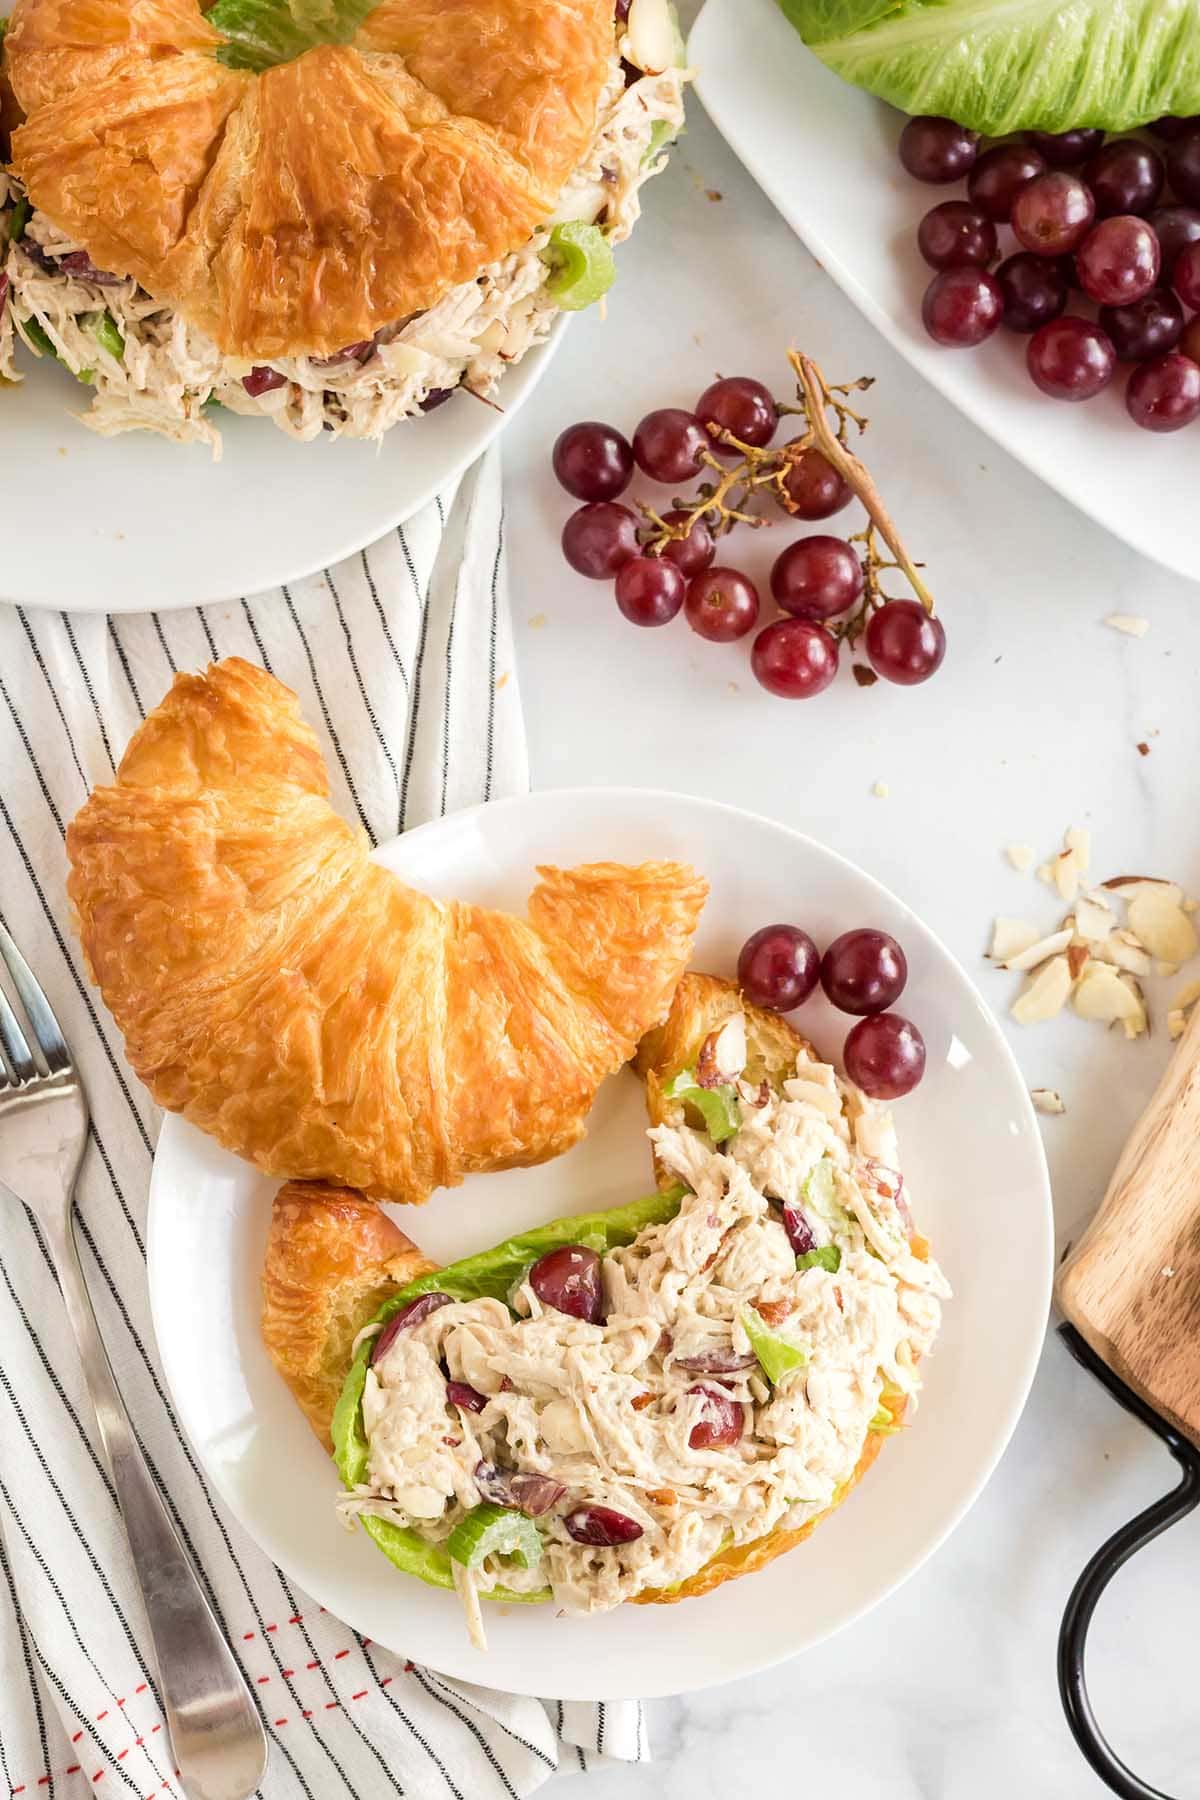 Sandwiches made with croissant filled with Chicken Salad and grapes on the table.